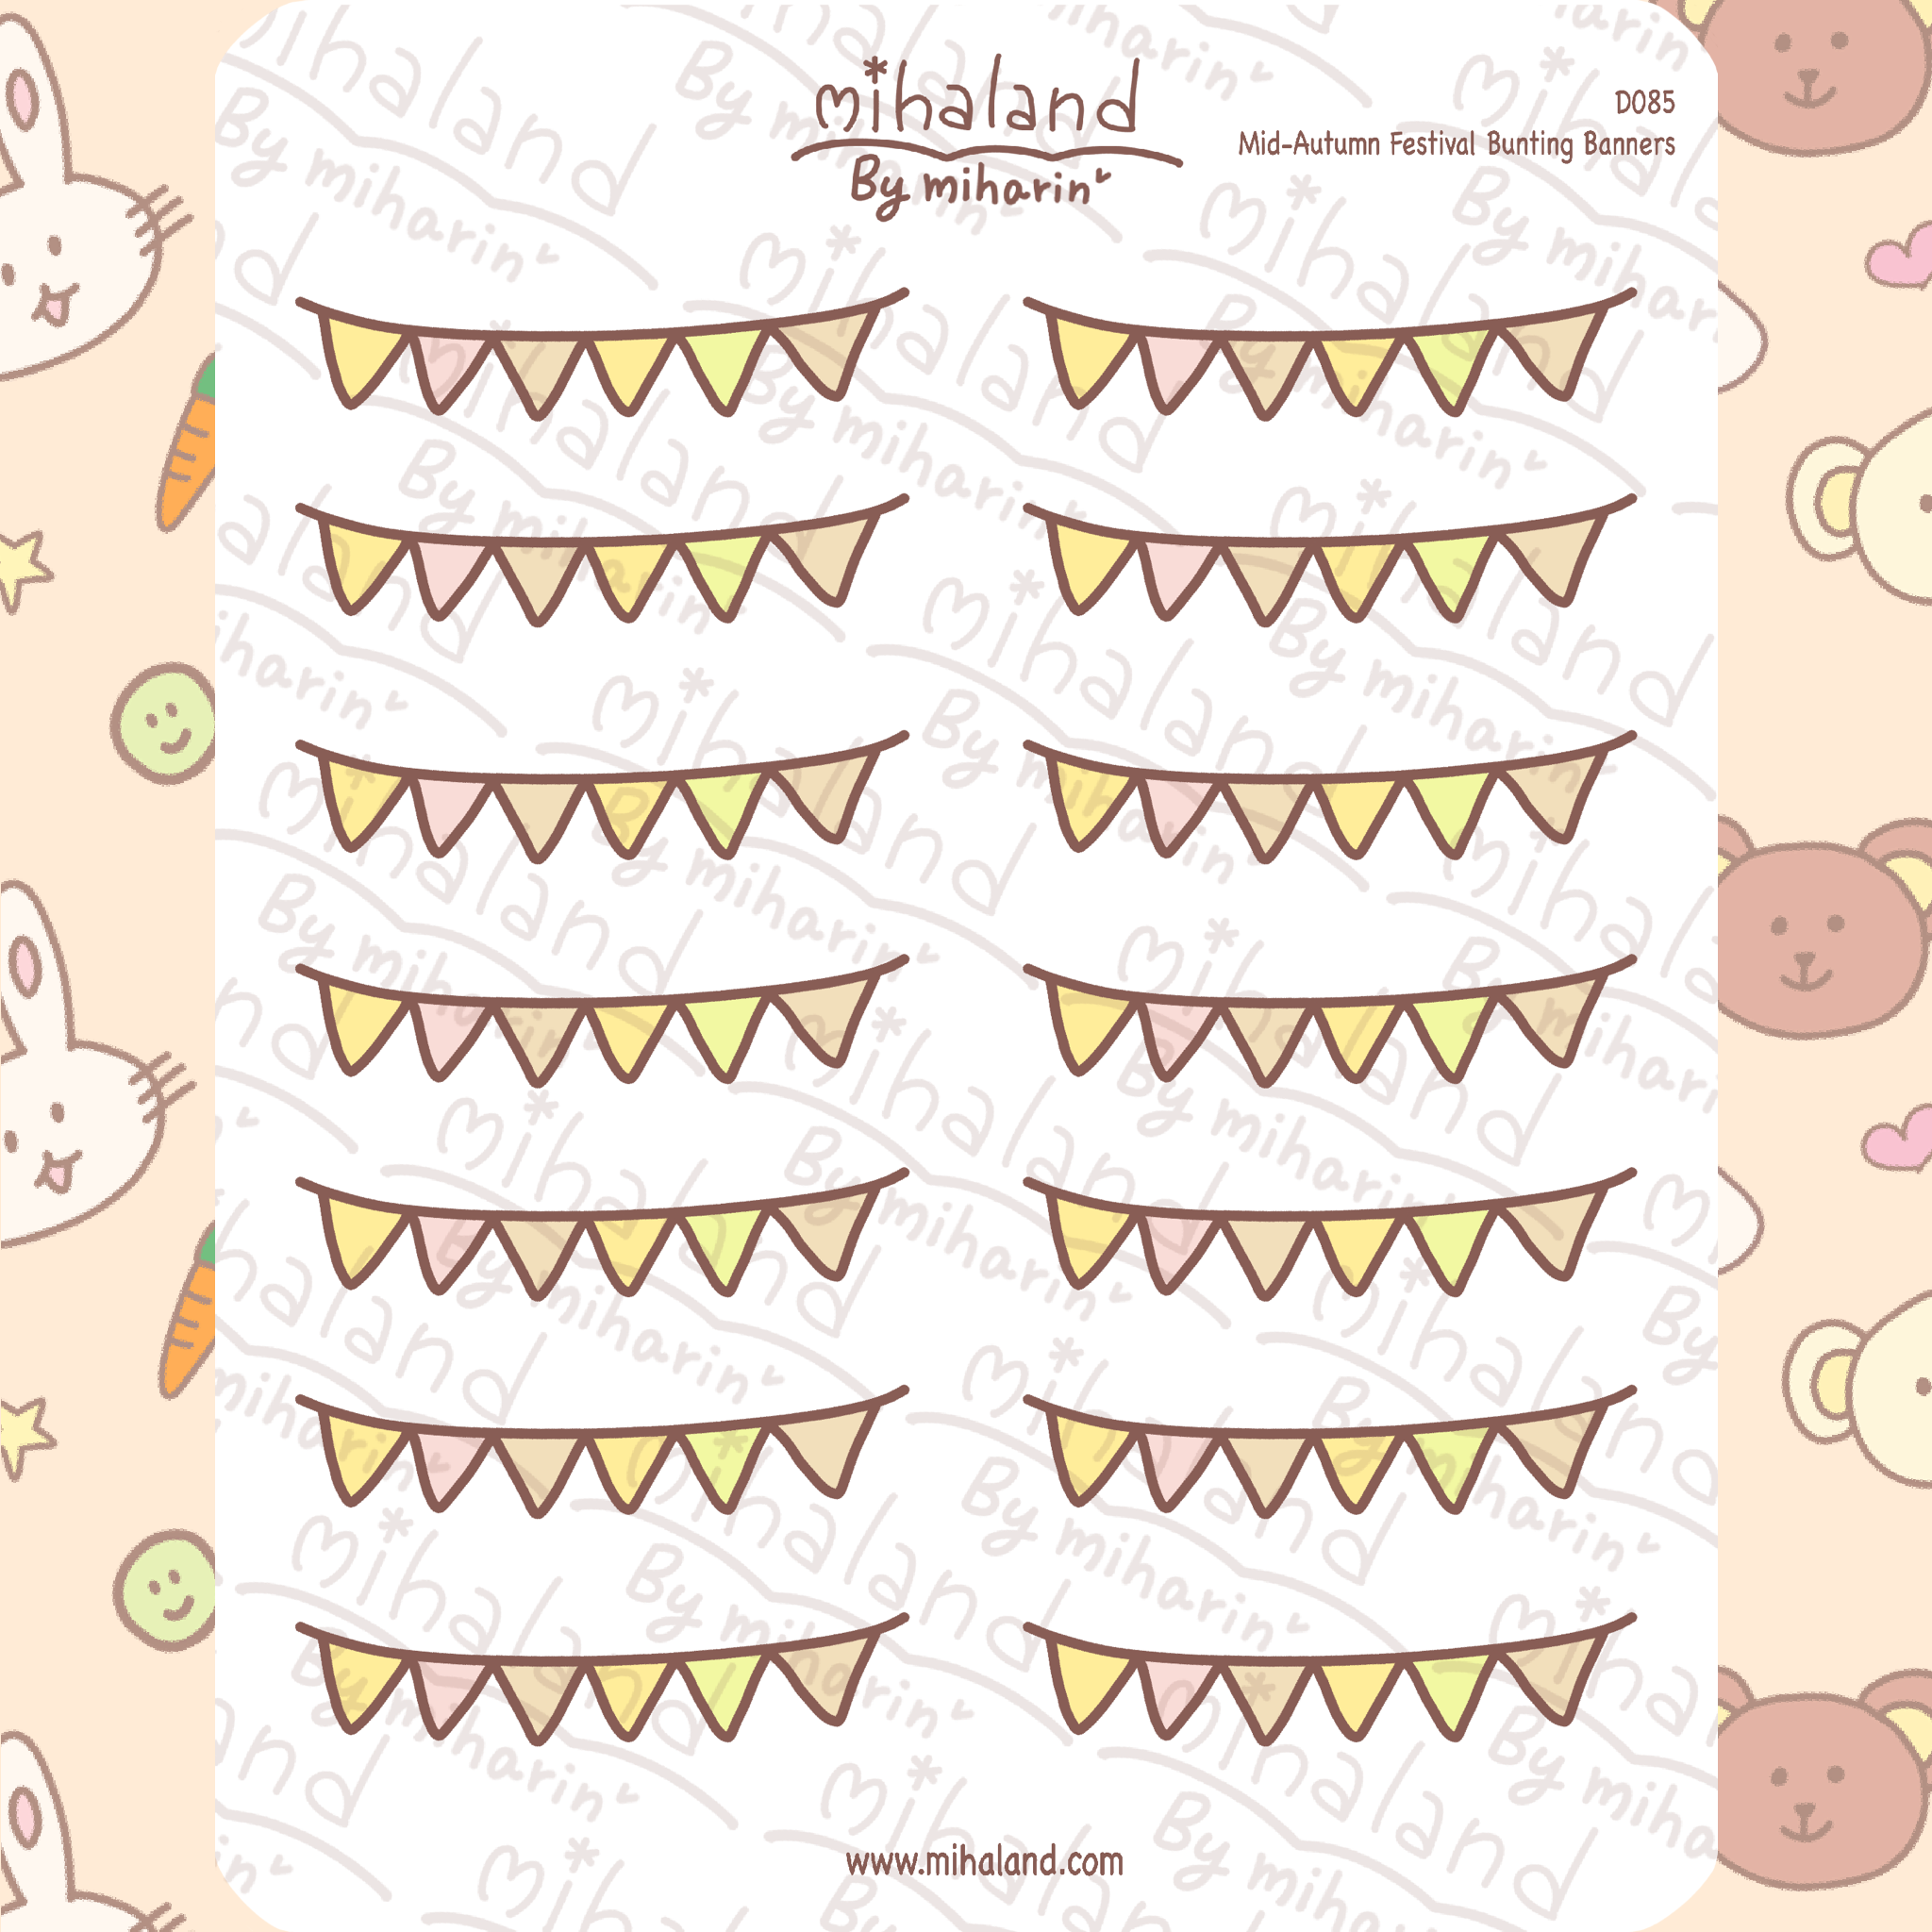 Mid-Autumn Festival Bunting Banners Planner Stickers (D085)